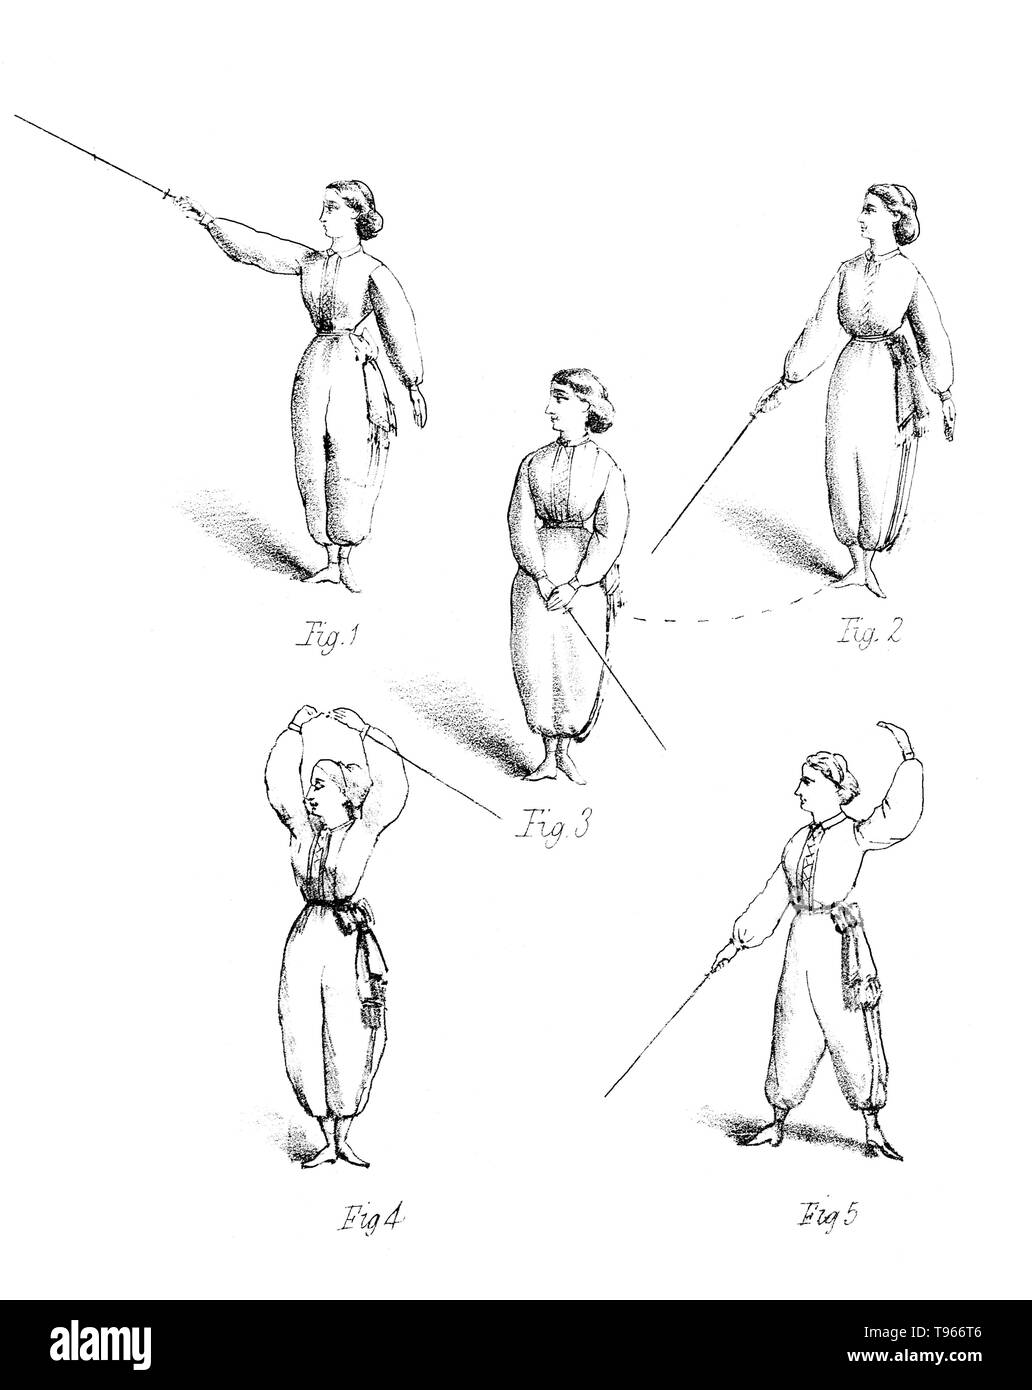 Gymnastics for ladies: a treatise on the science and art of calisthenic and gymnastic exercises by Madame Brenner. The model in this illustration is exercising with a sword-type piece of equipment called the Foil. Stock Photo